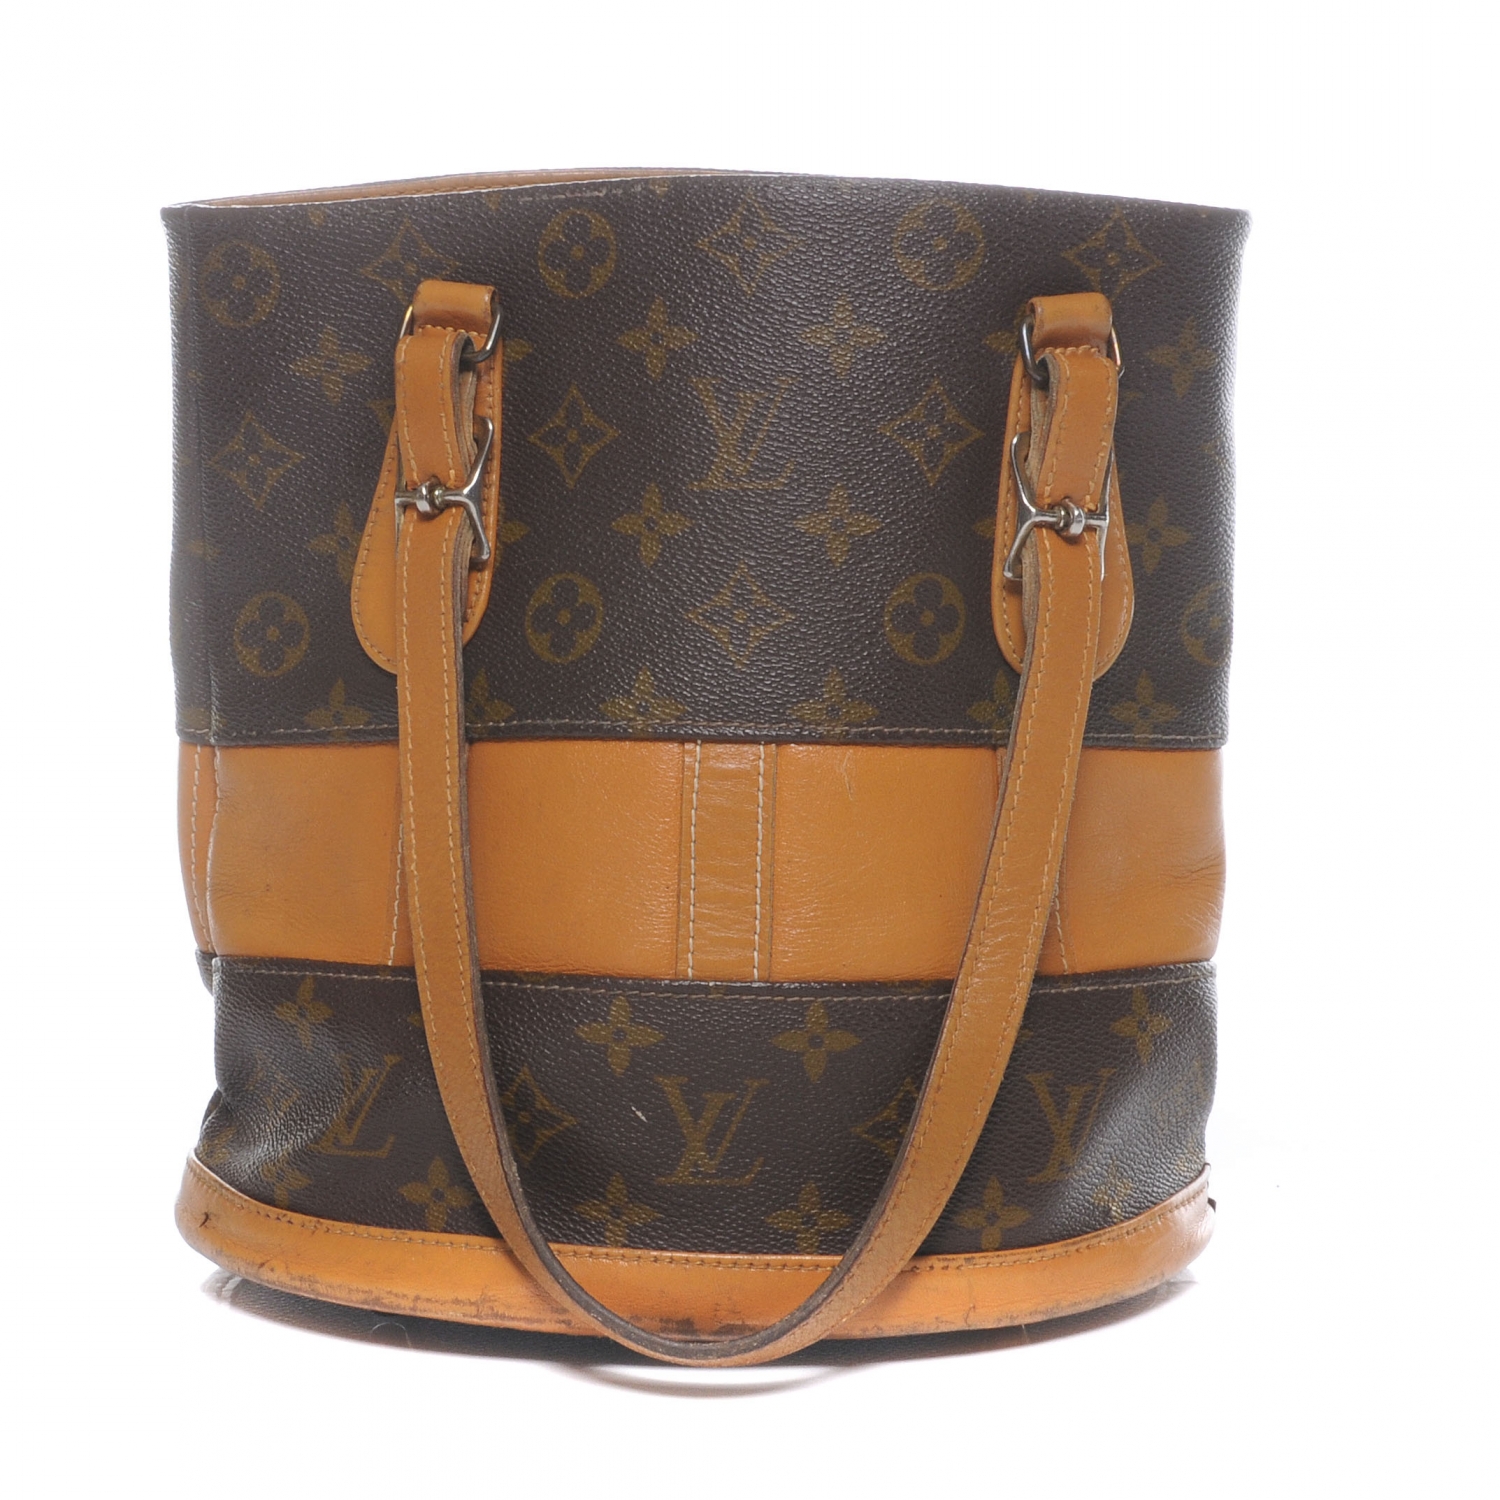 LOUIS VUITTON French Company Bucket 45964